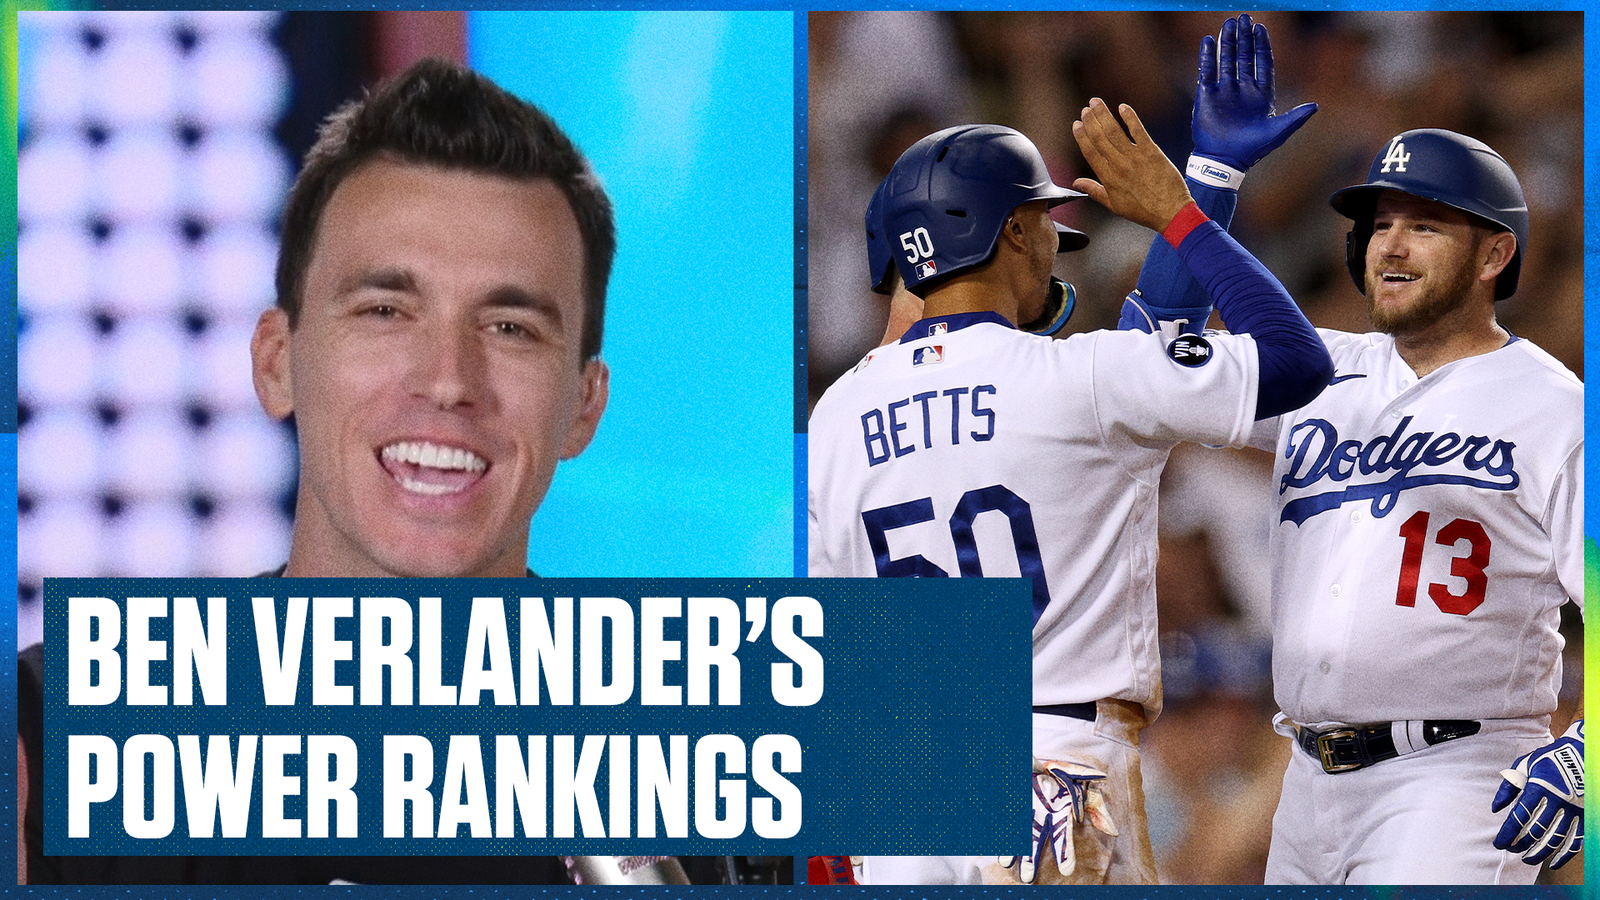 Dodgers and Astros lead MLB Power Rankings